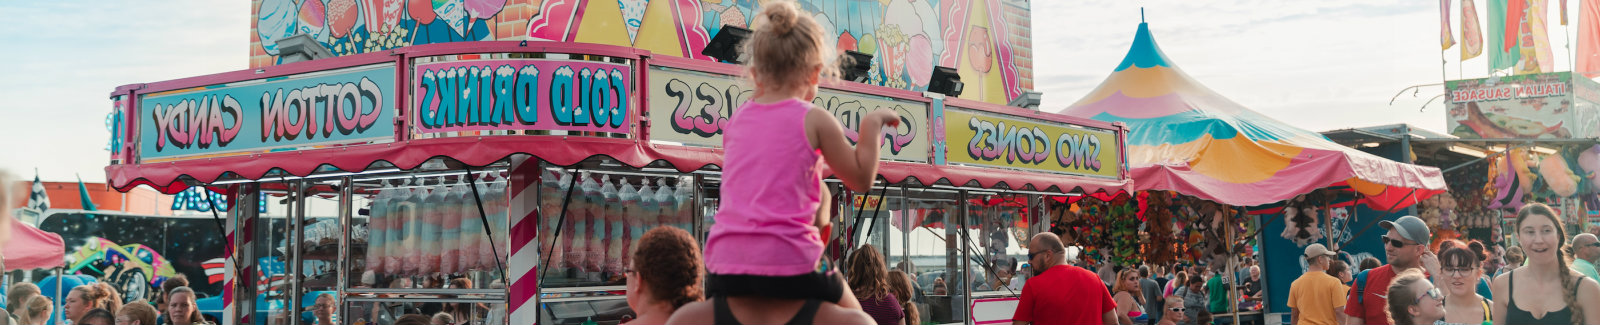 Little girl on dad's shoulders at Harborfest 2019 in Oswego, NY.